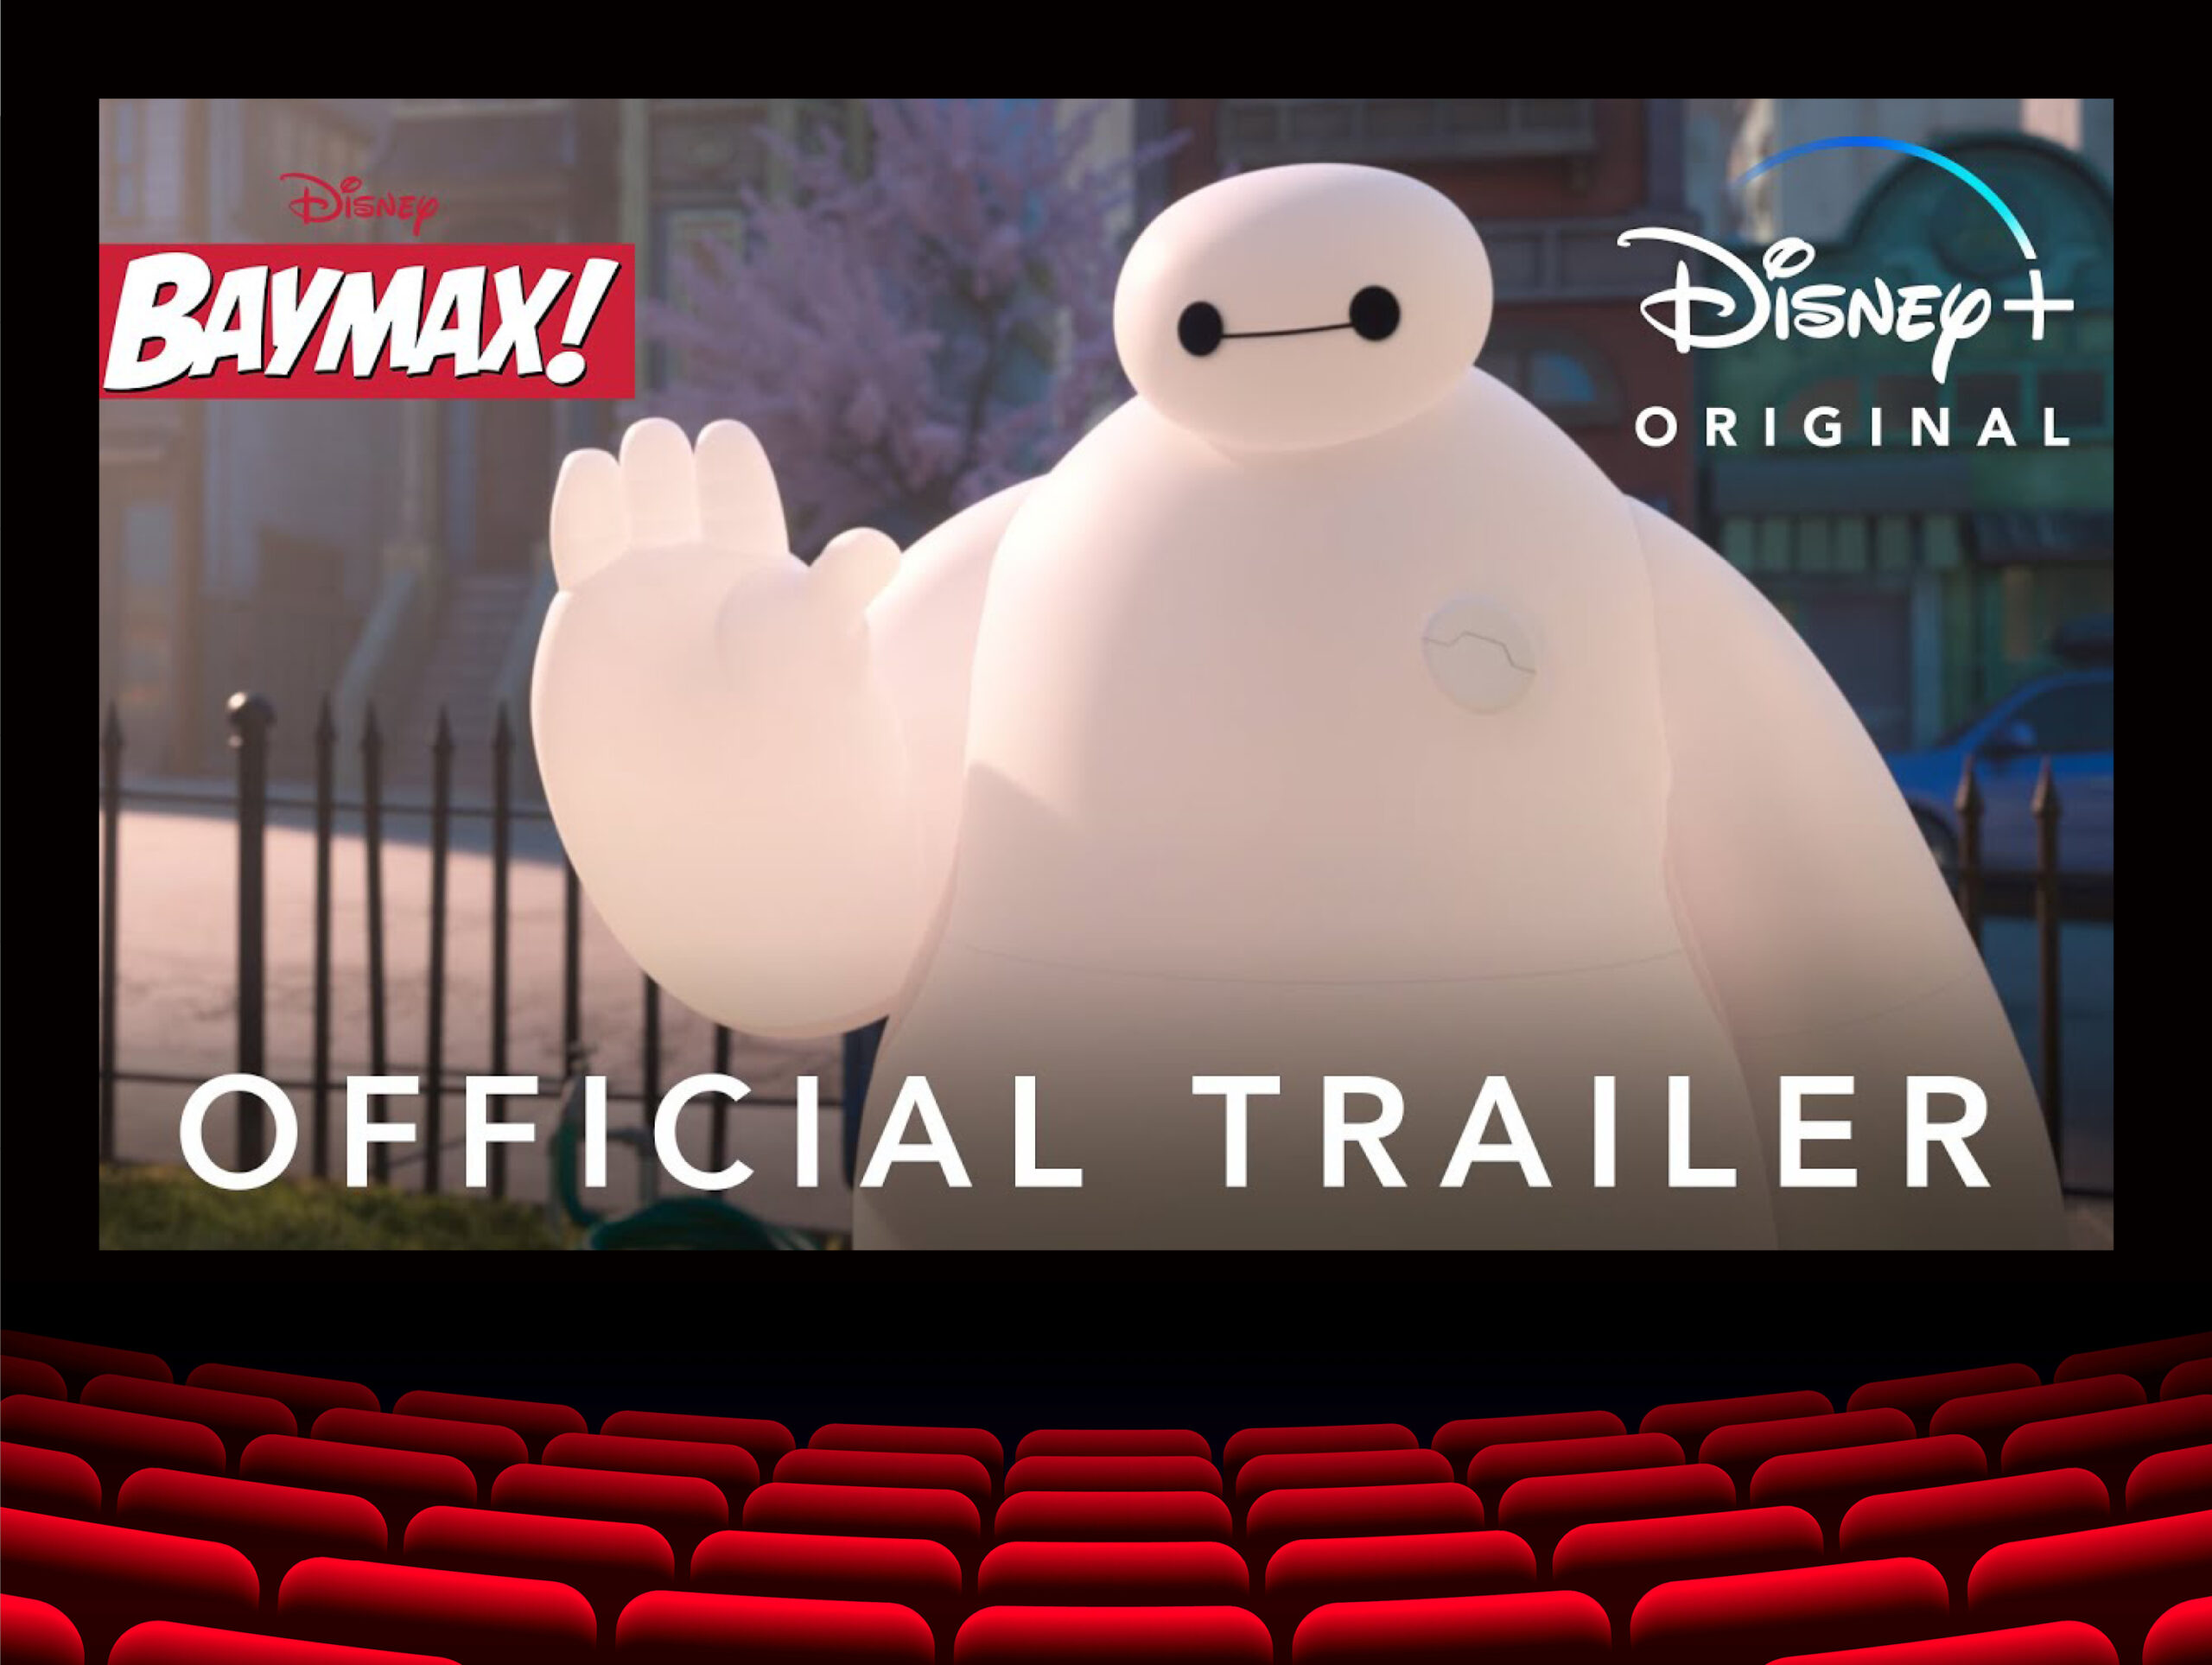 Baymax! Official Trailer